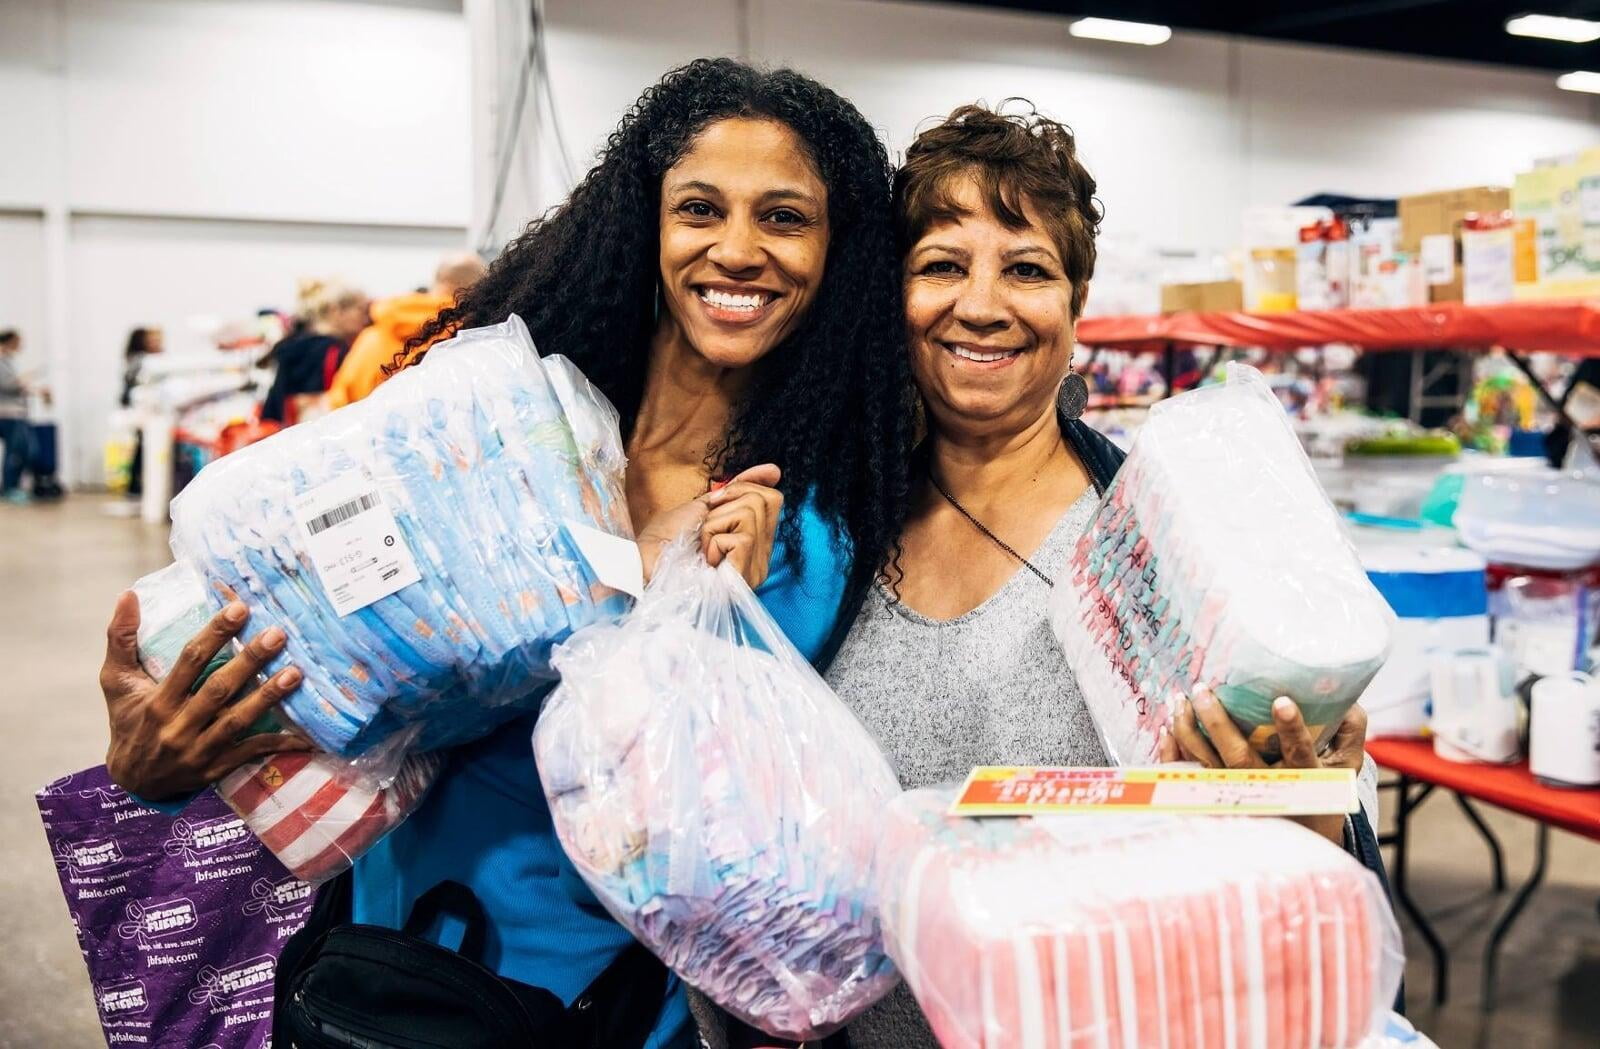 Two women shopping are holding packs of diapers.